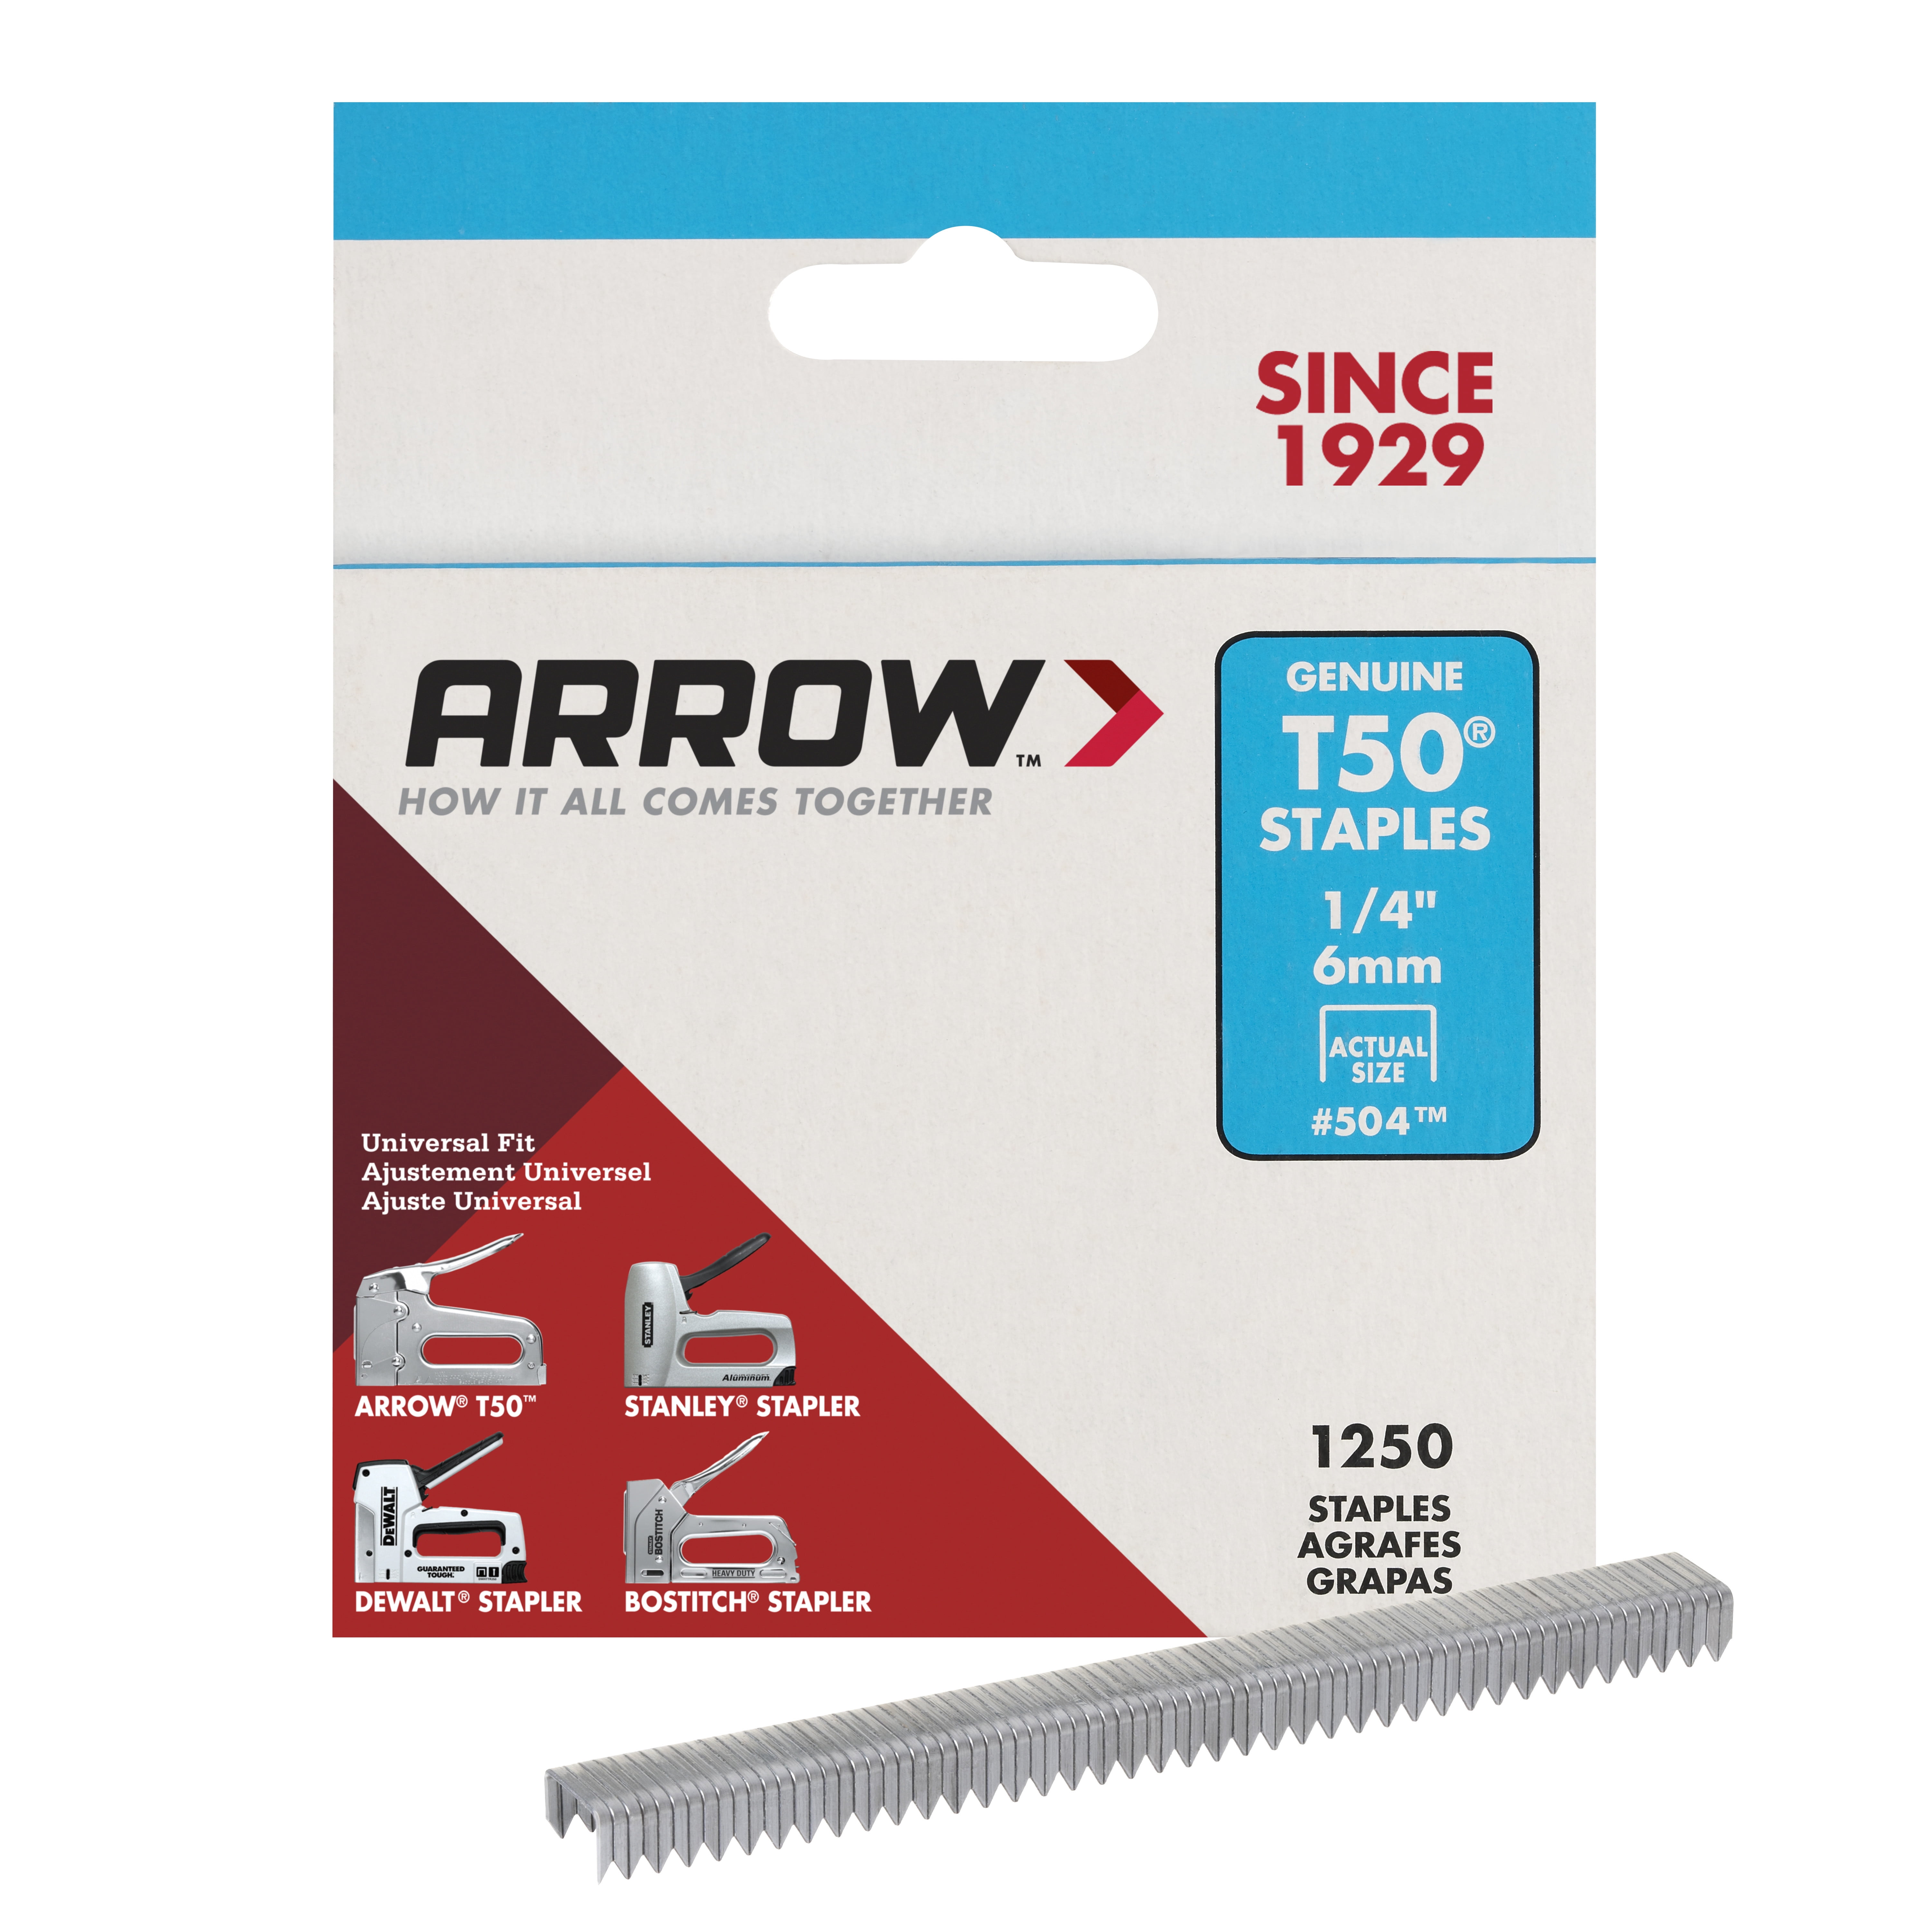 Details about   NEW 2000 Ct Vintage Arrow 1/4 Inch Staples for Arrow Tacker T-50 T-55 HT-50M 